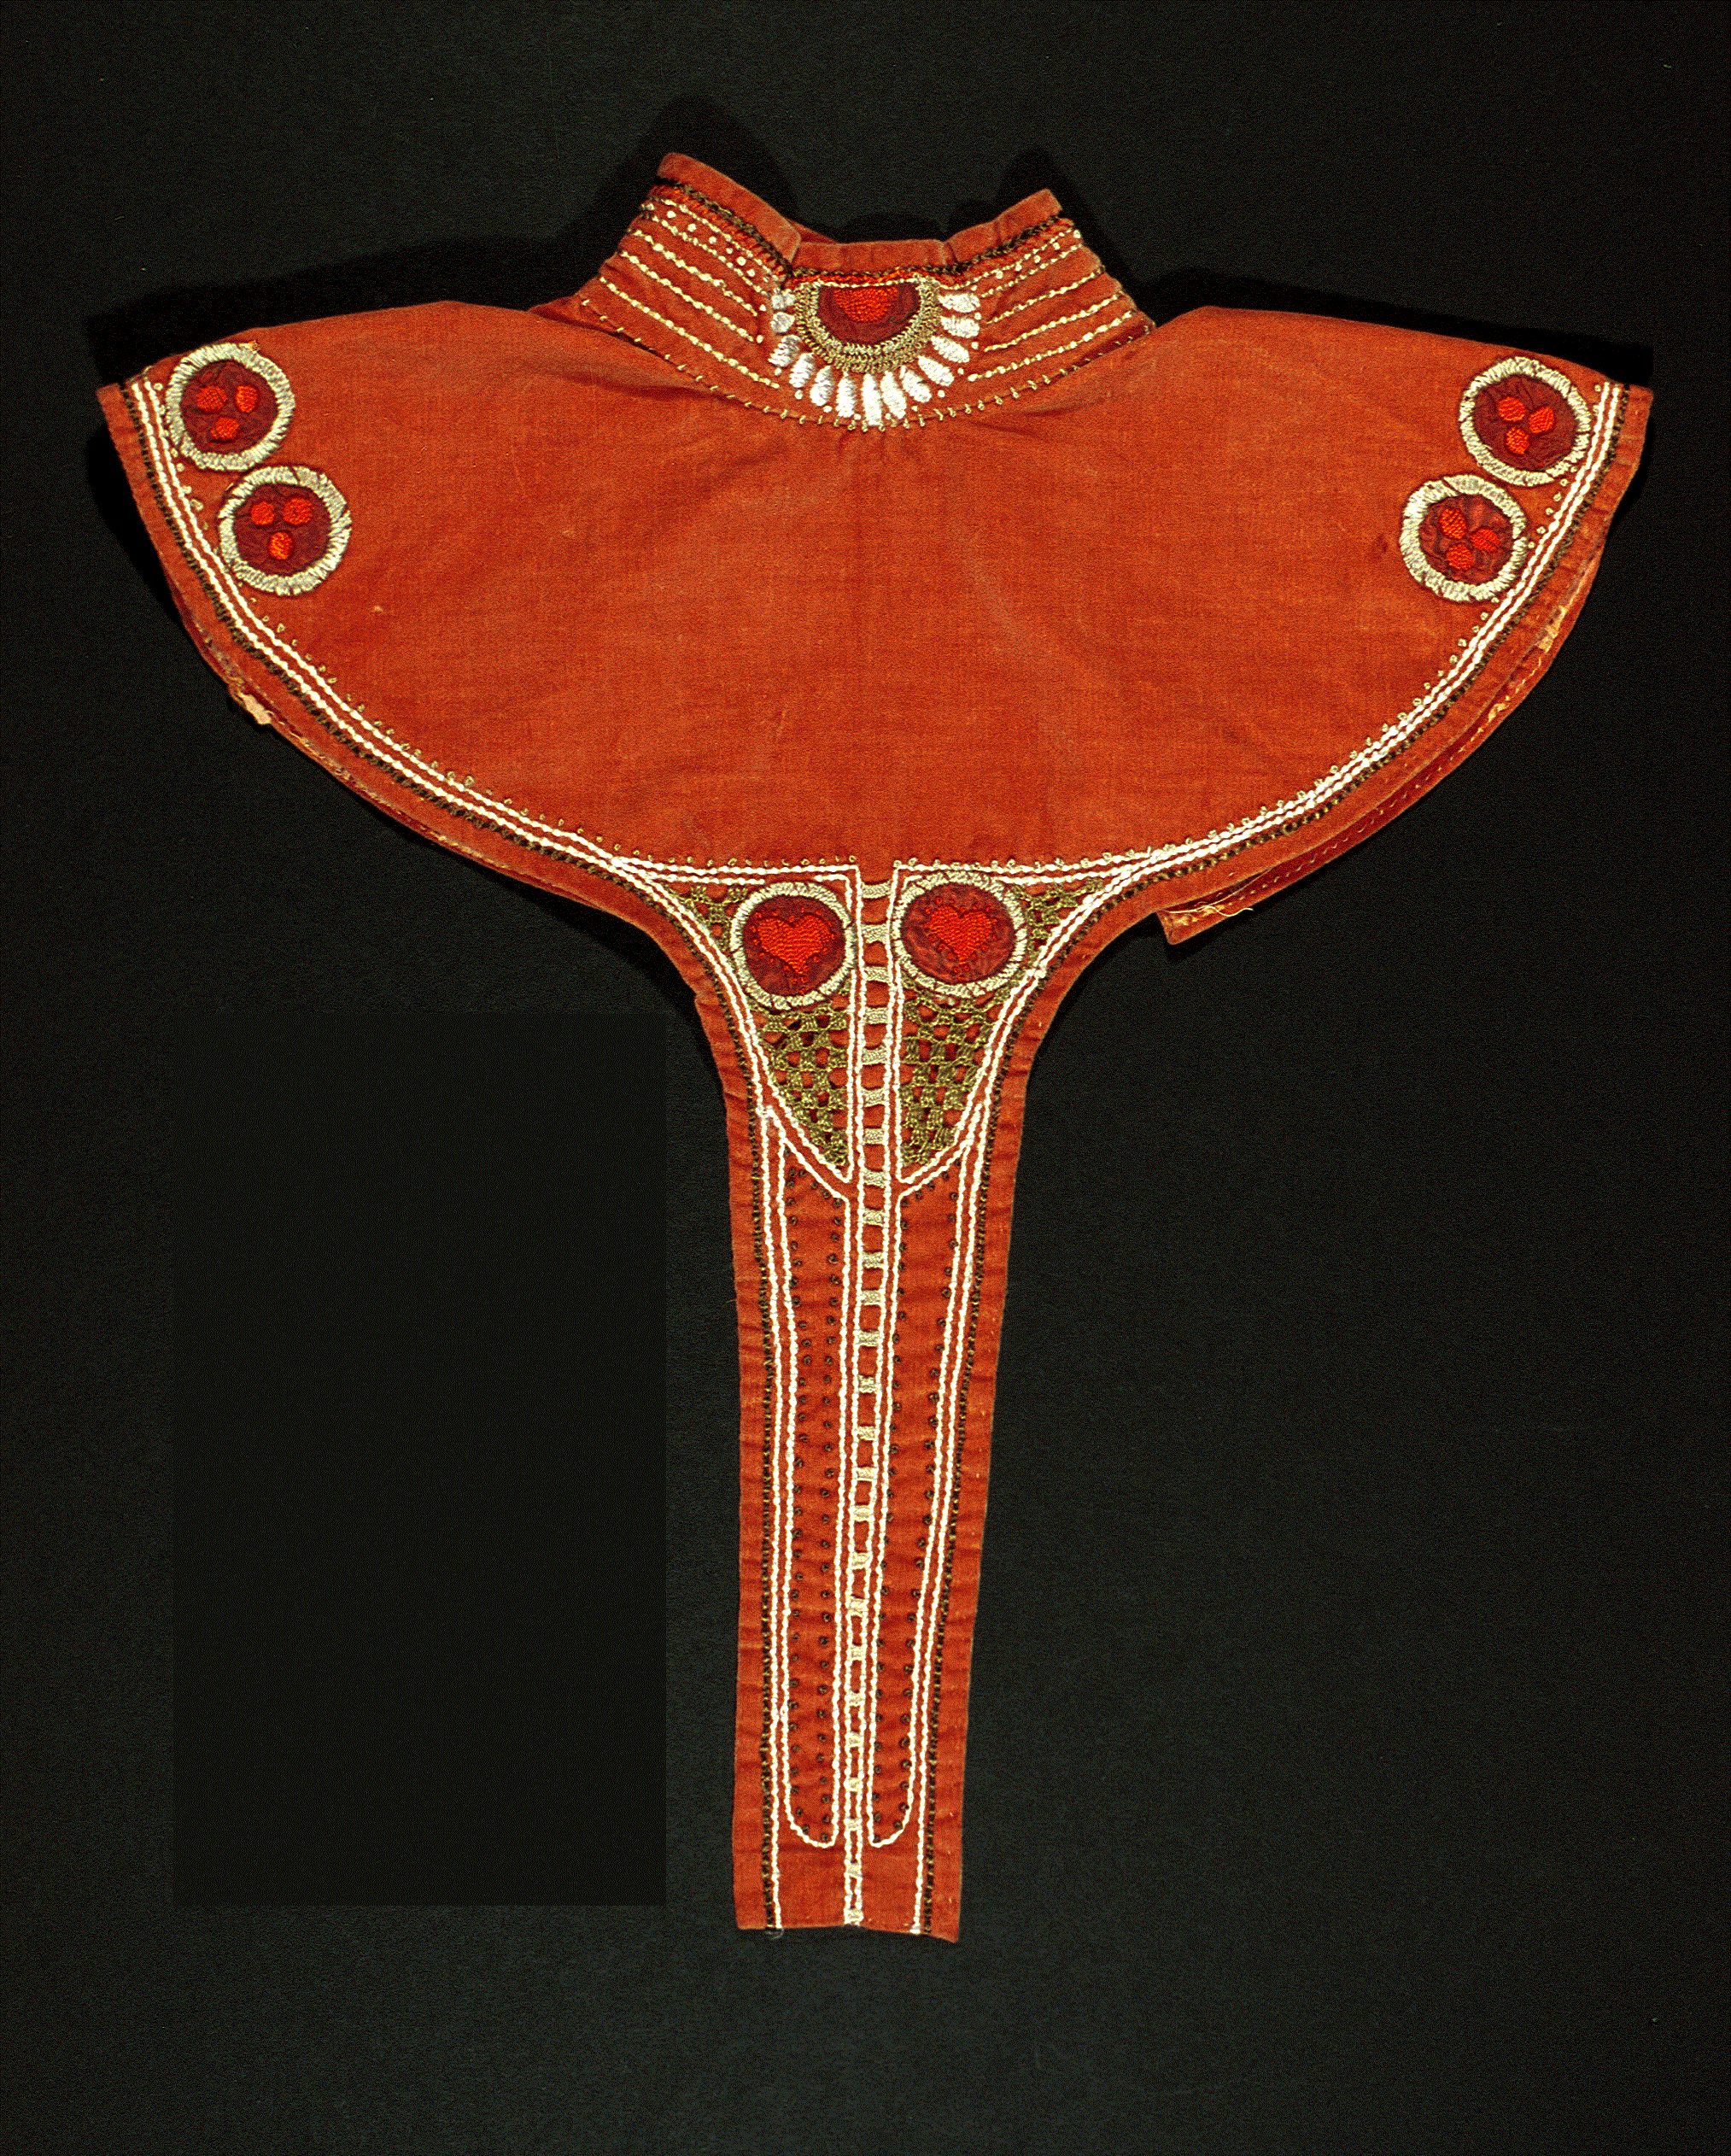 NMC 420 - Embroidered Yoke/Collar, c.1911-1920, probably worked by one of Ann Macbeth's students